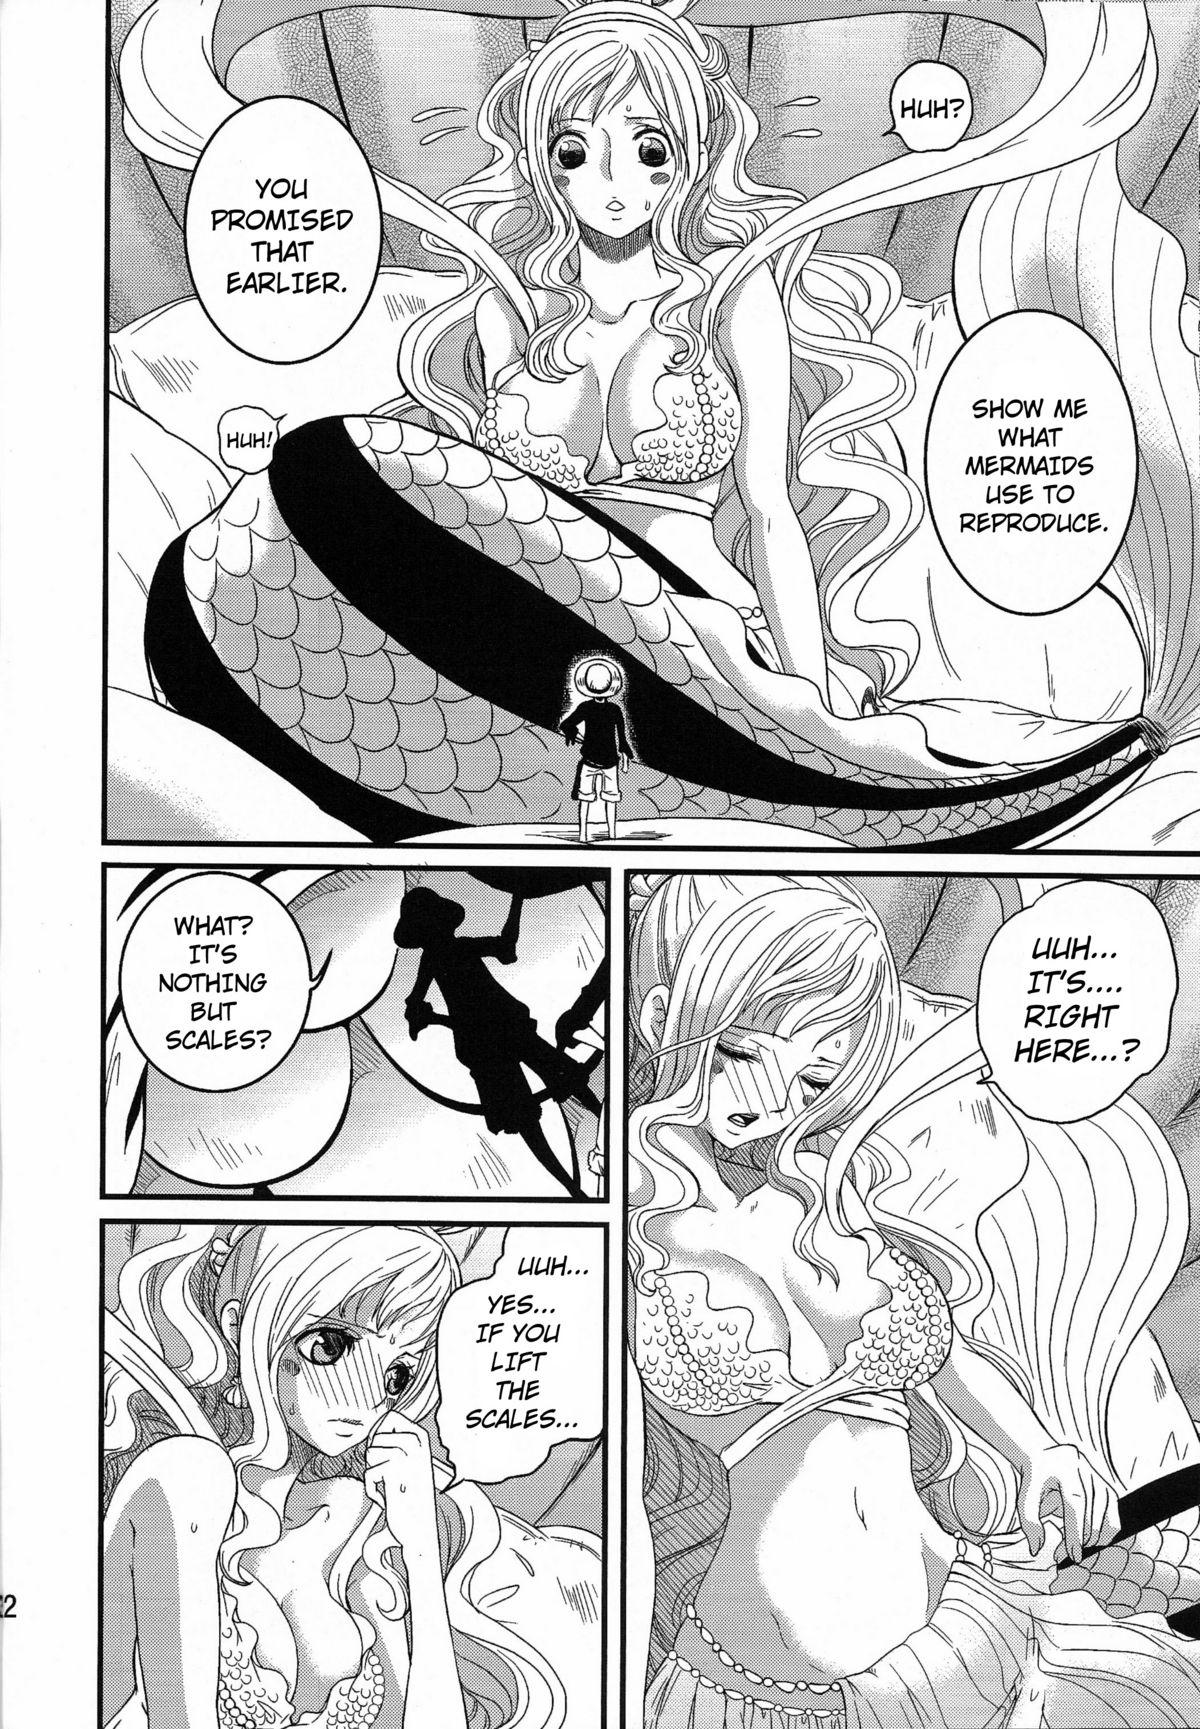 Queen Mermaid One Piece Porn - Ningyohime - One Piece Hentai - HENTAIE.NET